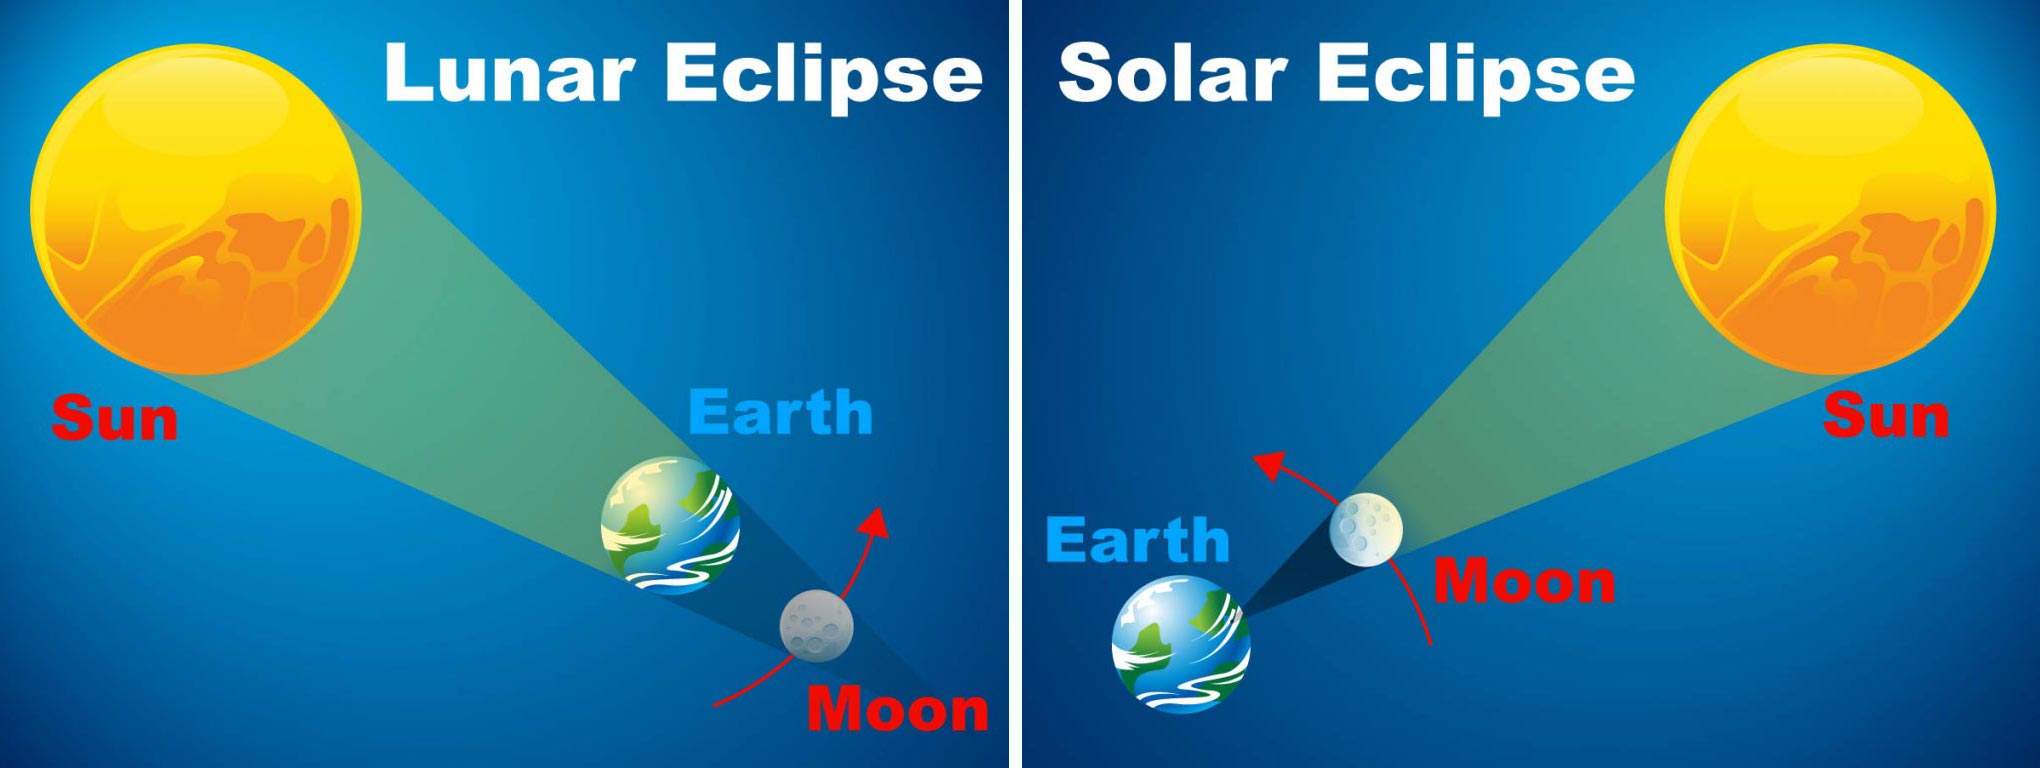 Two illustrations representing eclipses. One represents a Lunar Eclipse, with the sun shining on the earth which is in front of the moon. The second represents a Solar Eclipse, with the sun shining on the moon which is in front of the earth.